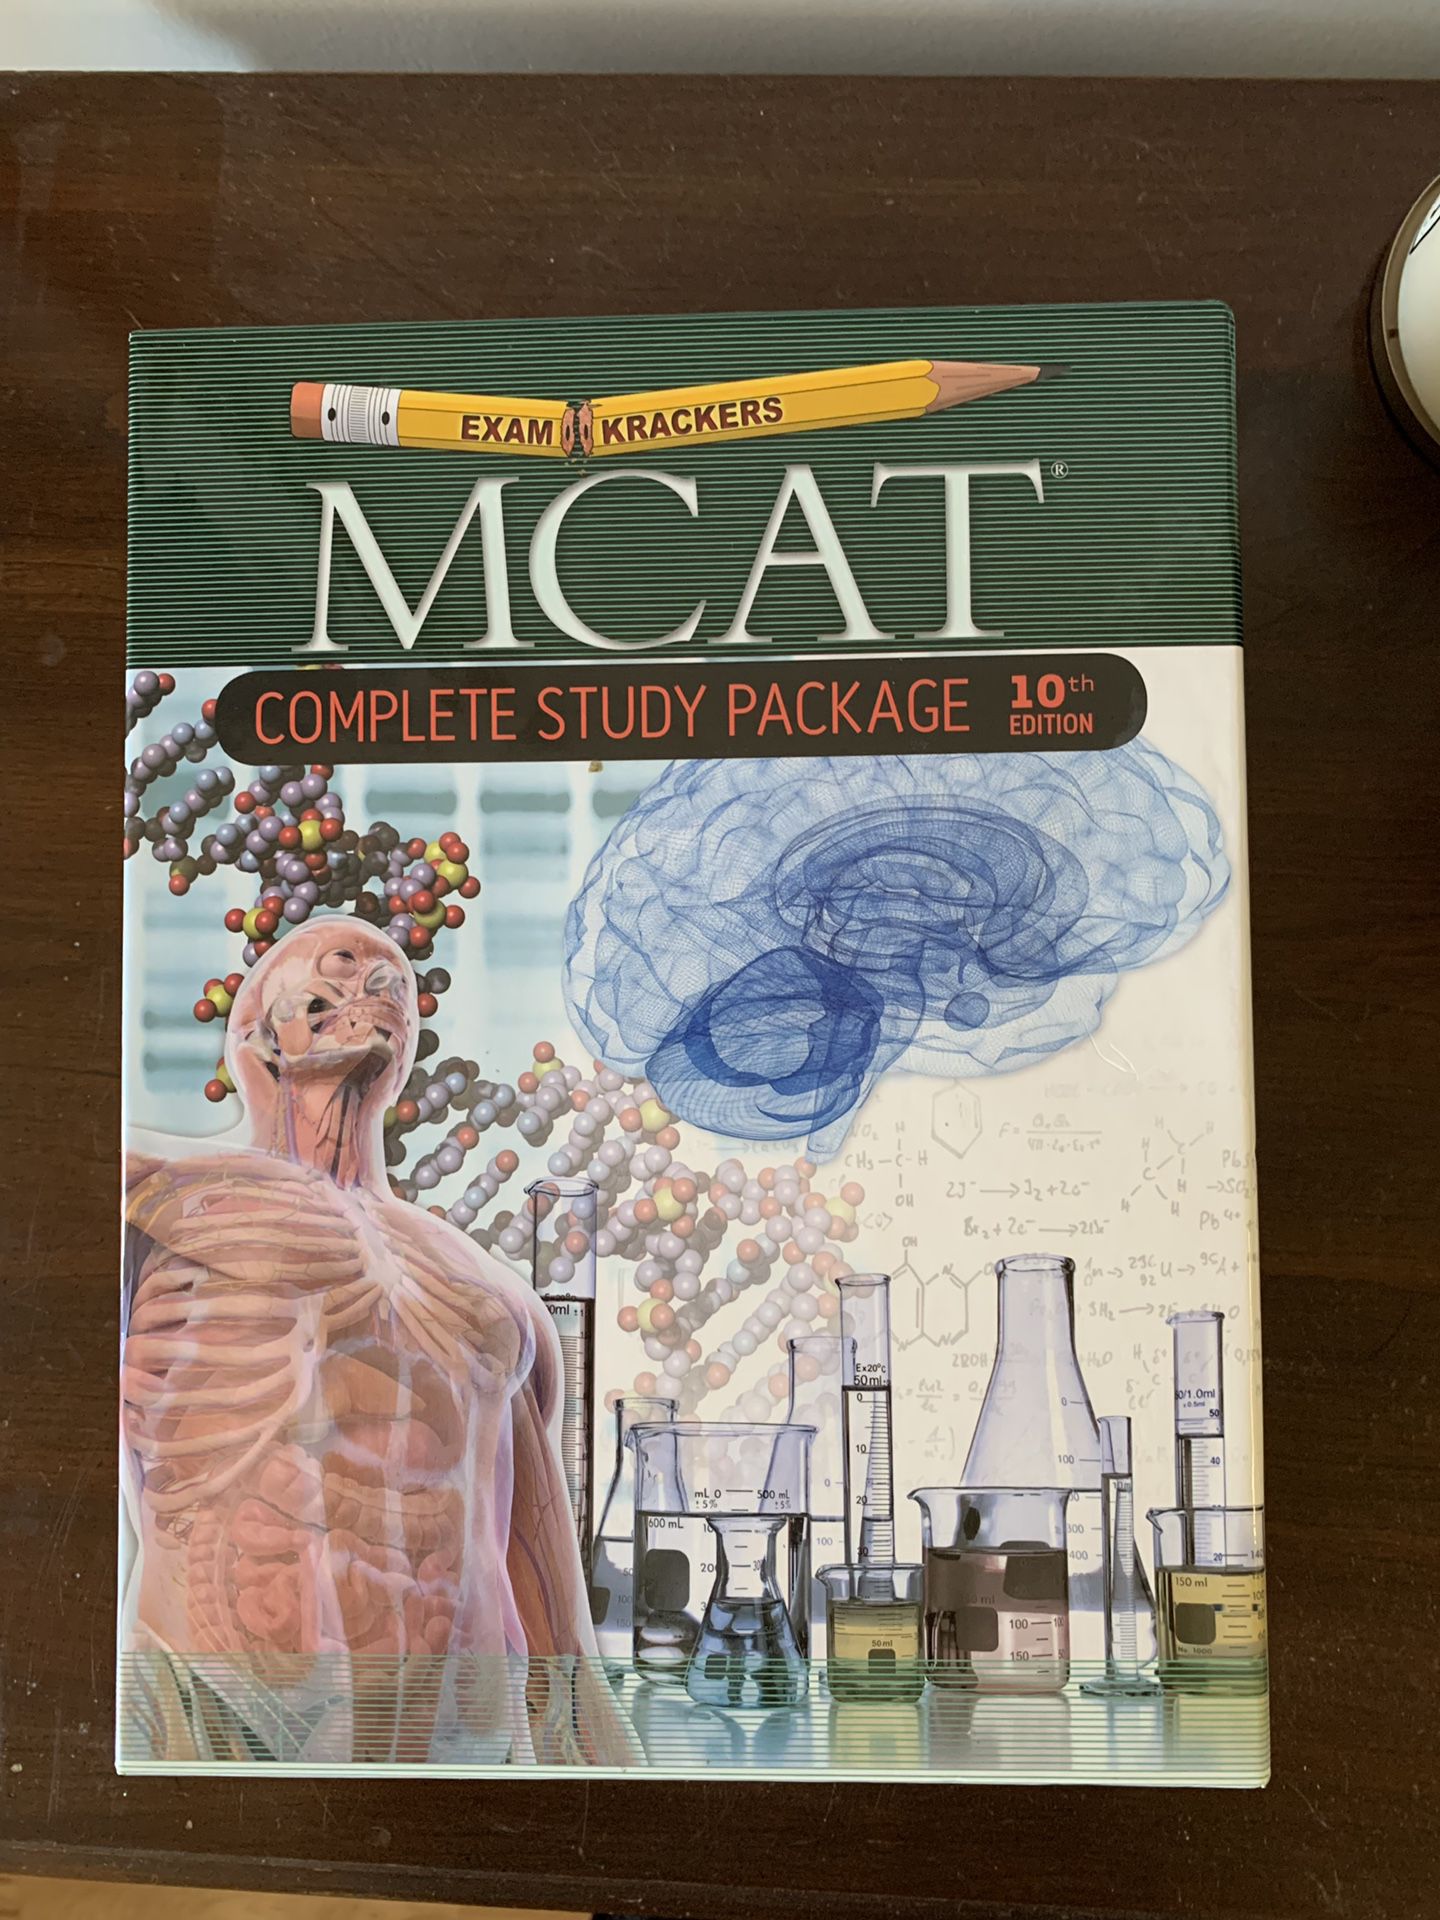 Examkrackers 10th Edition MCAT Study Package Study Guide Edition